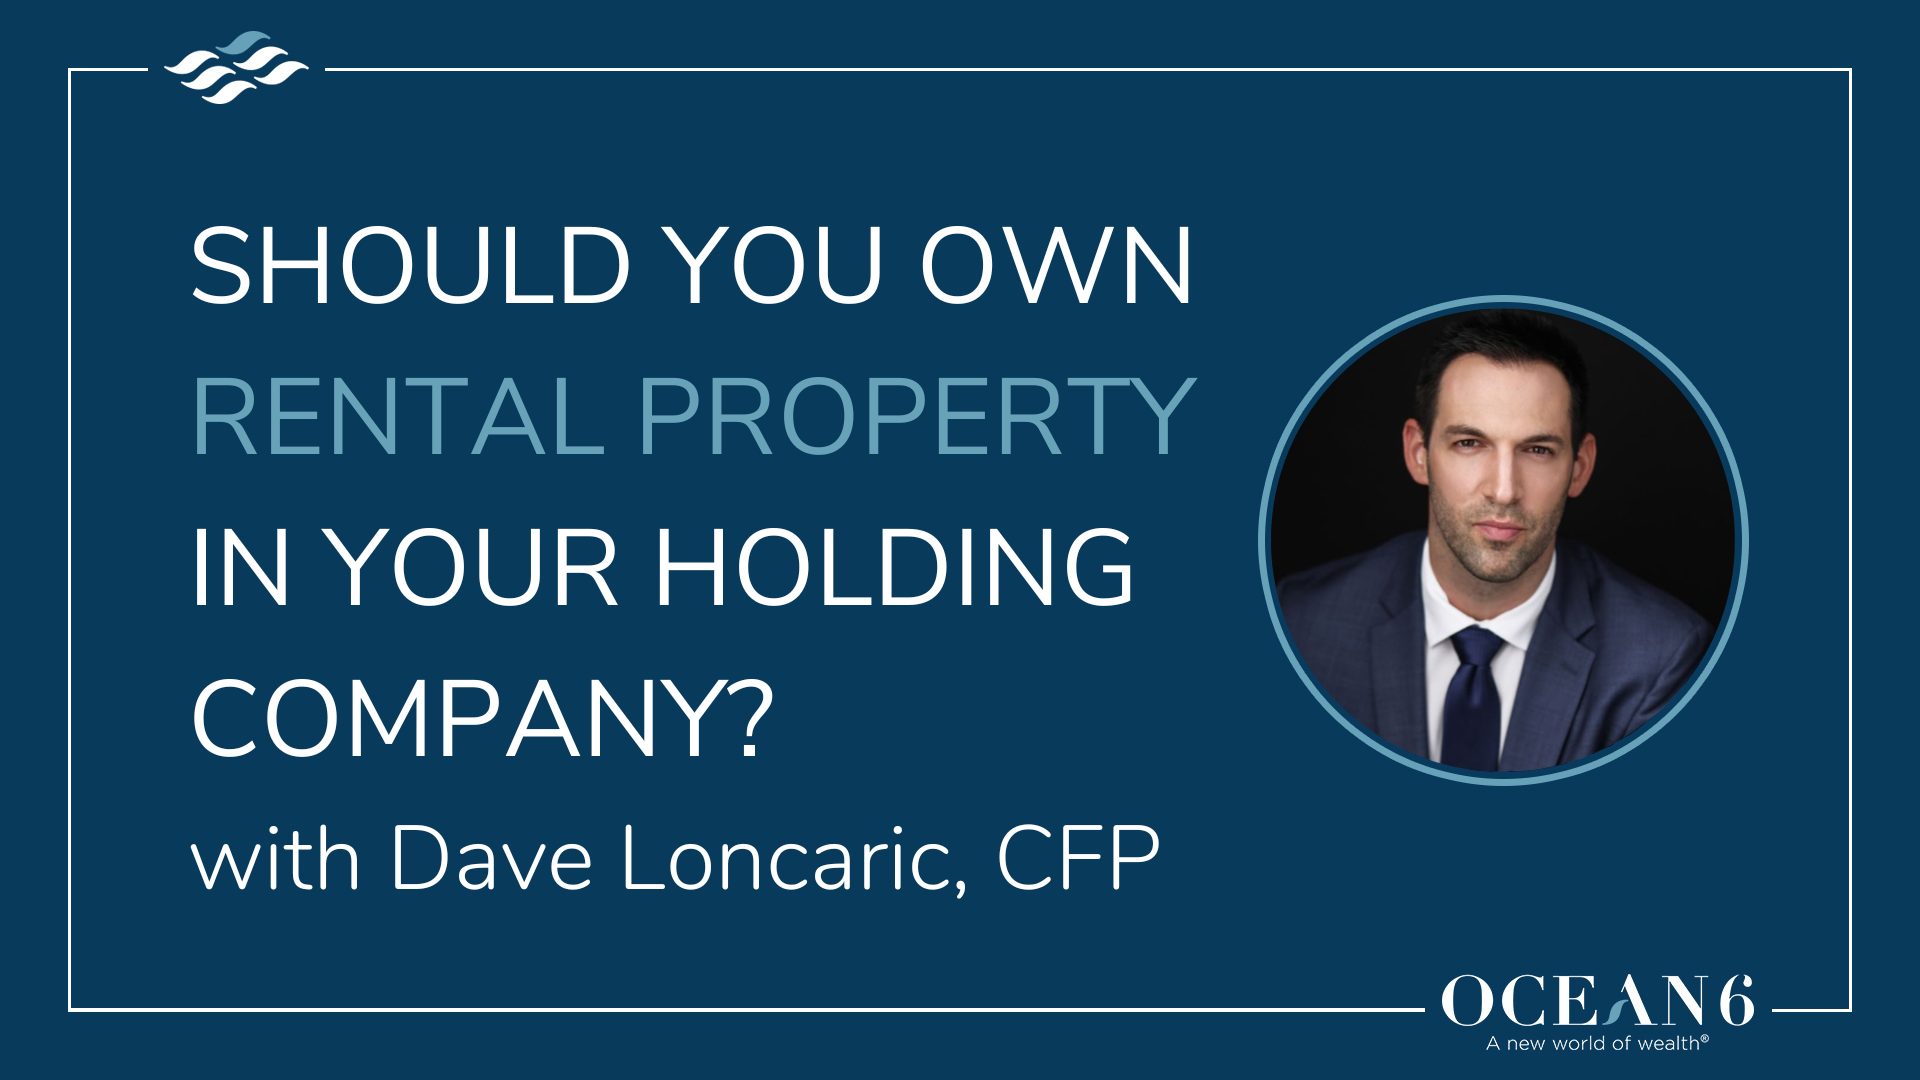 Financial advisor head shot - should you own rental property in your holding company?